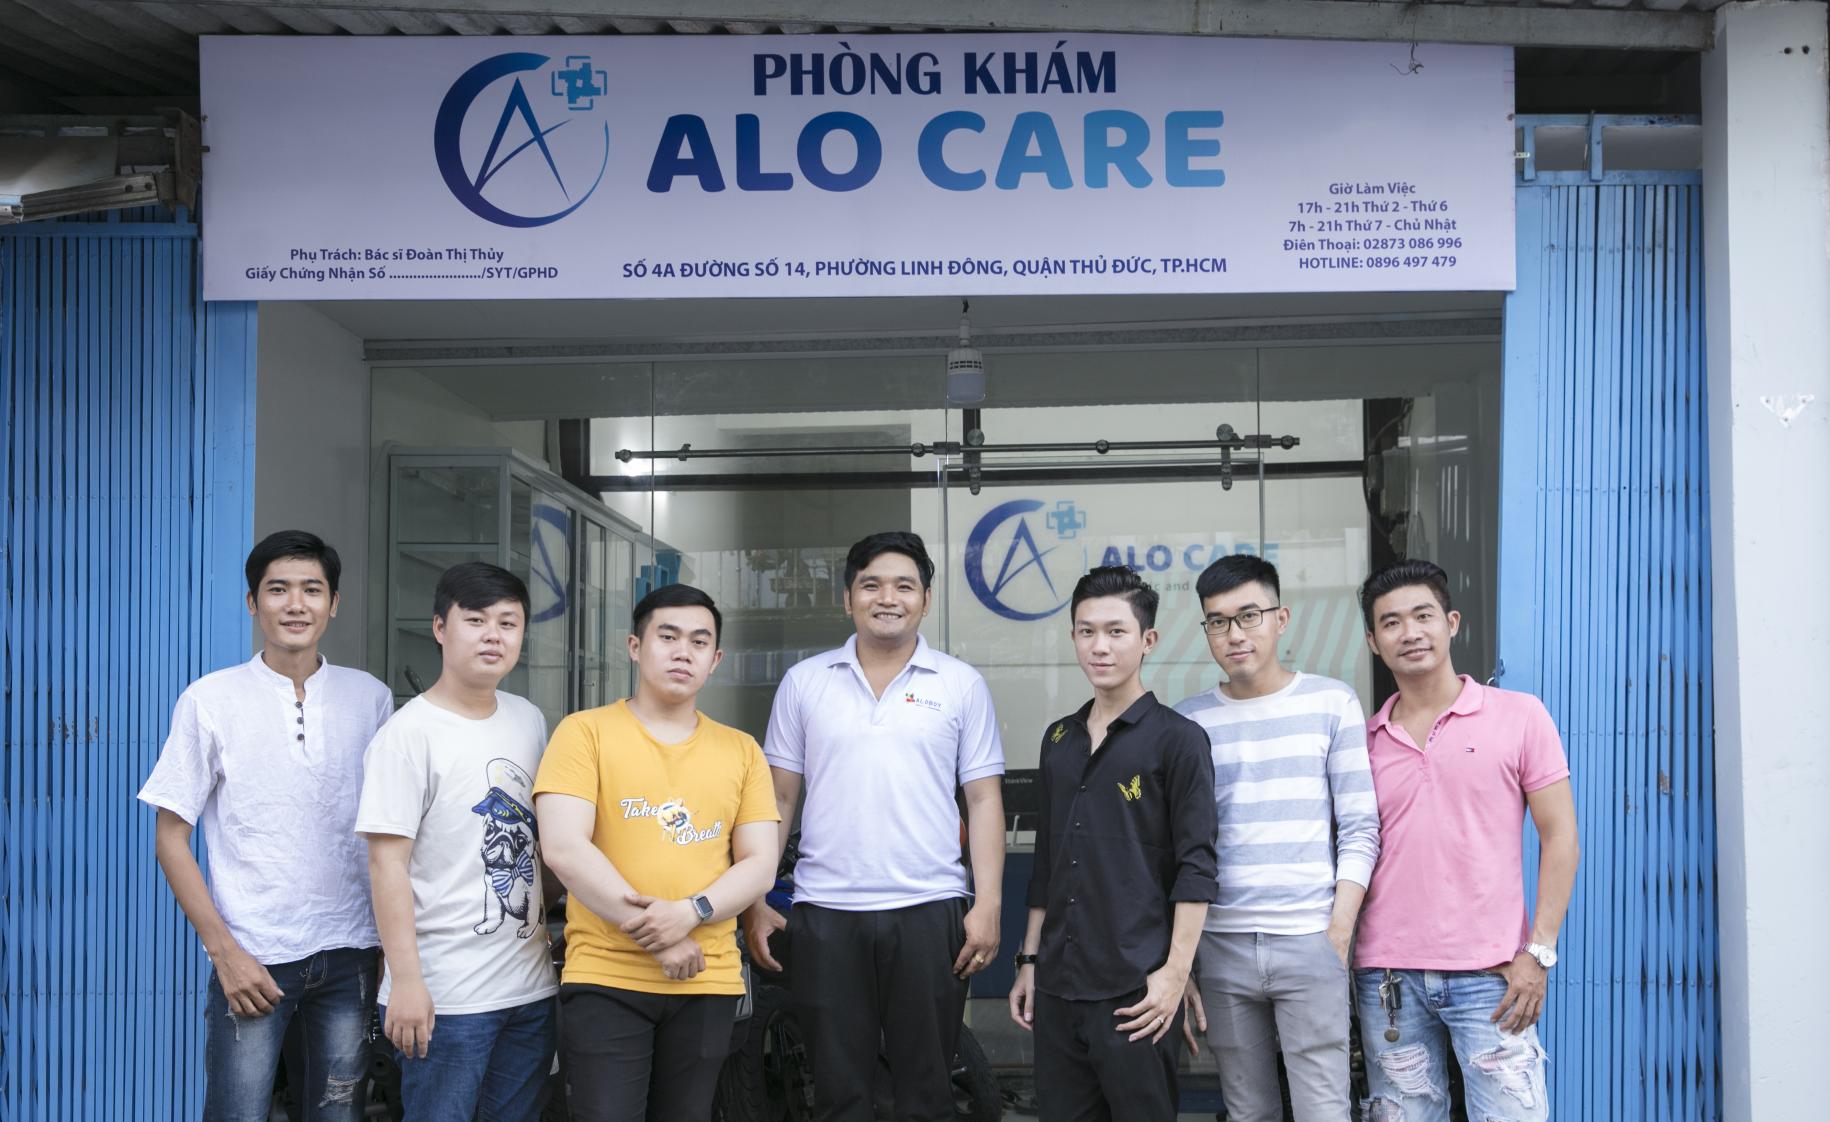 Minh Thuan with his self-help group stand proudly in front of the entrance of Alo Care.